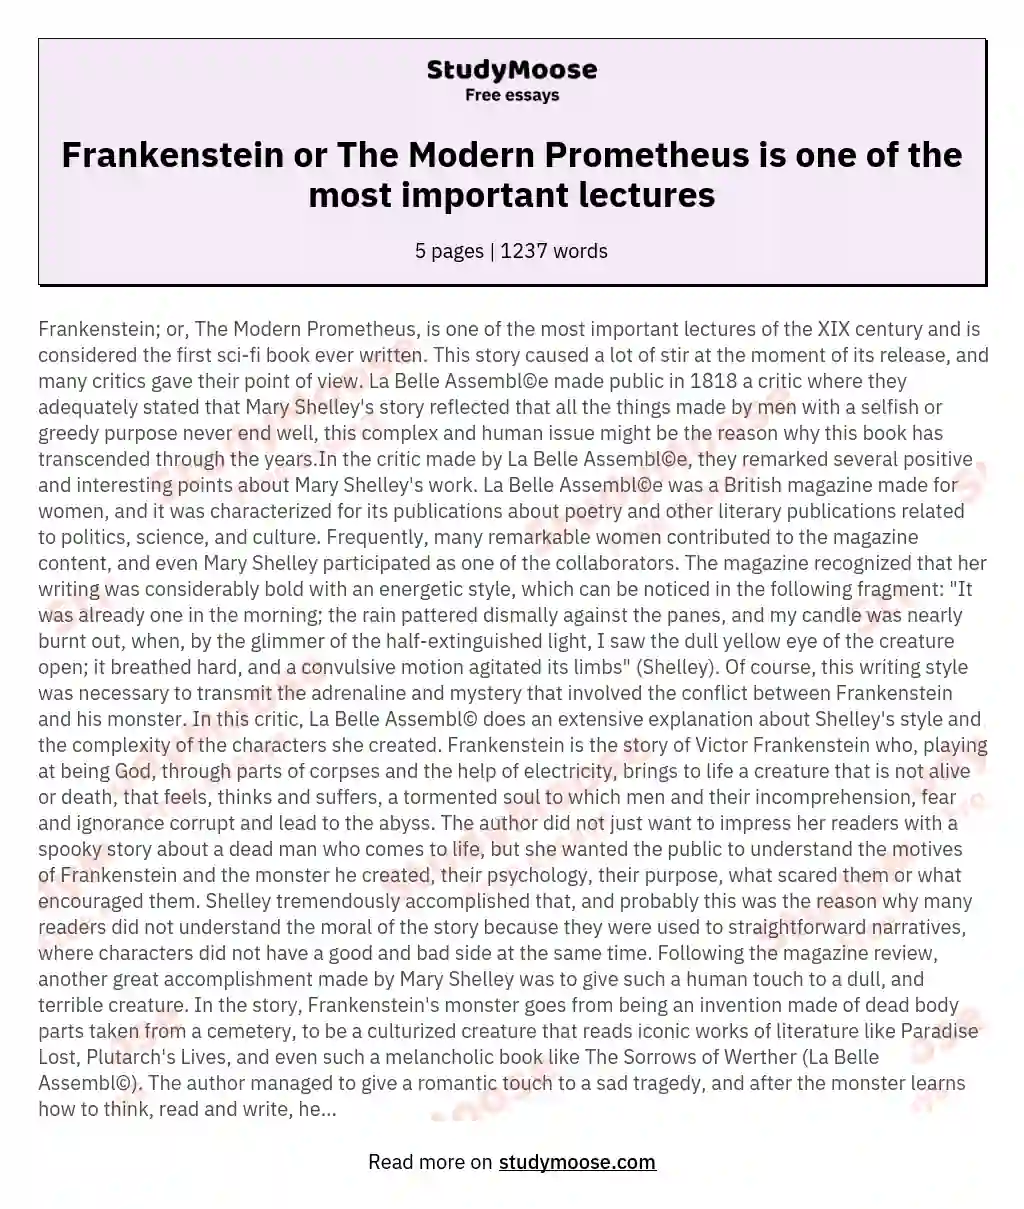 Frankenstein or The Modern Prometheus is one of the most important lectures essay